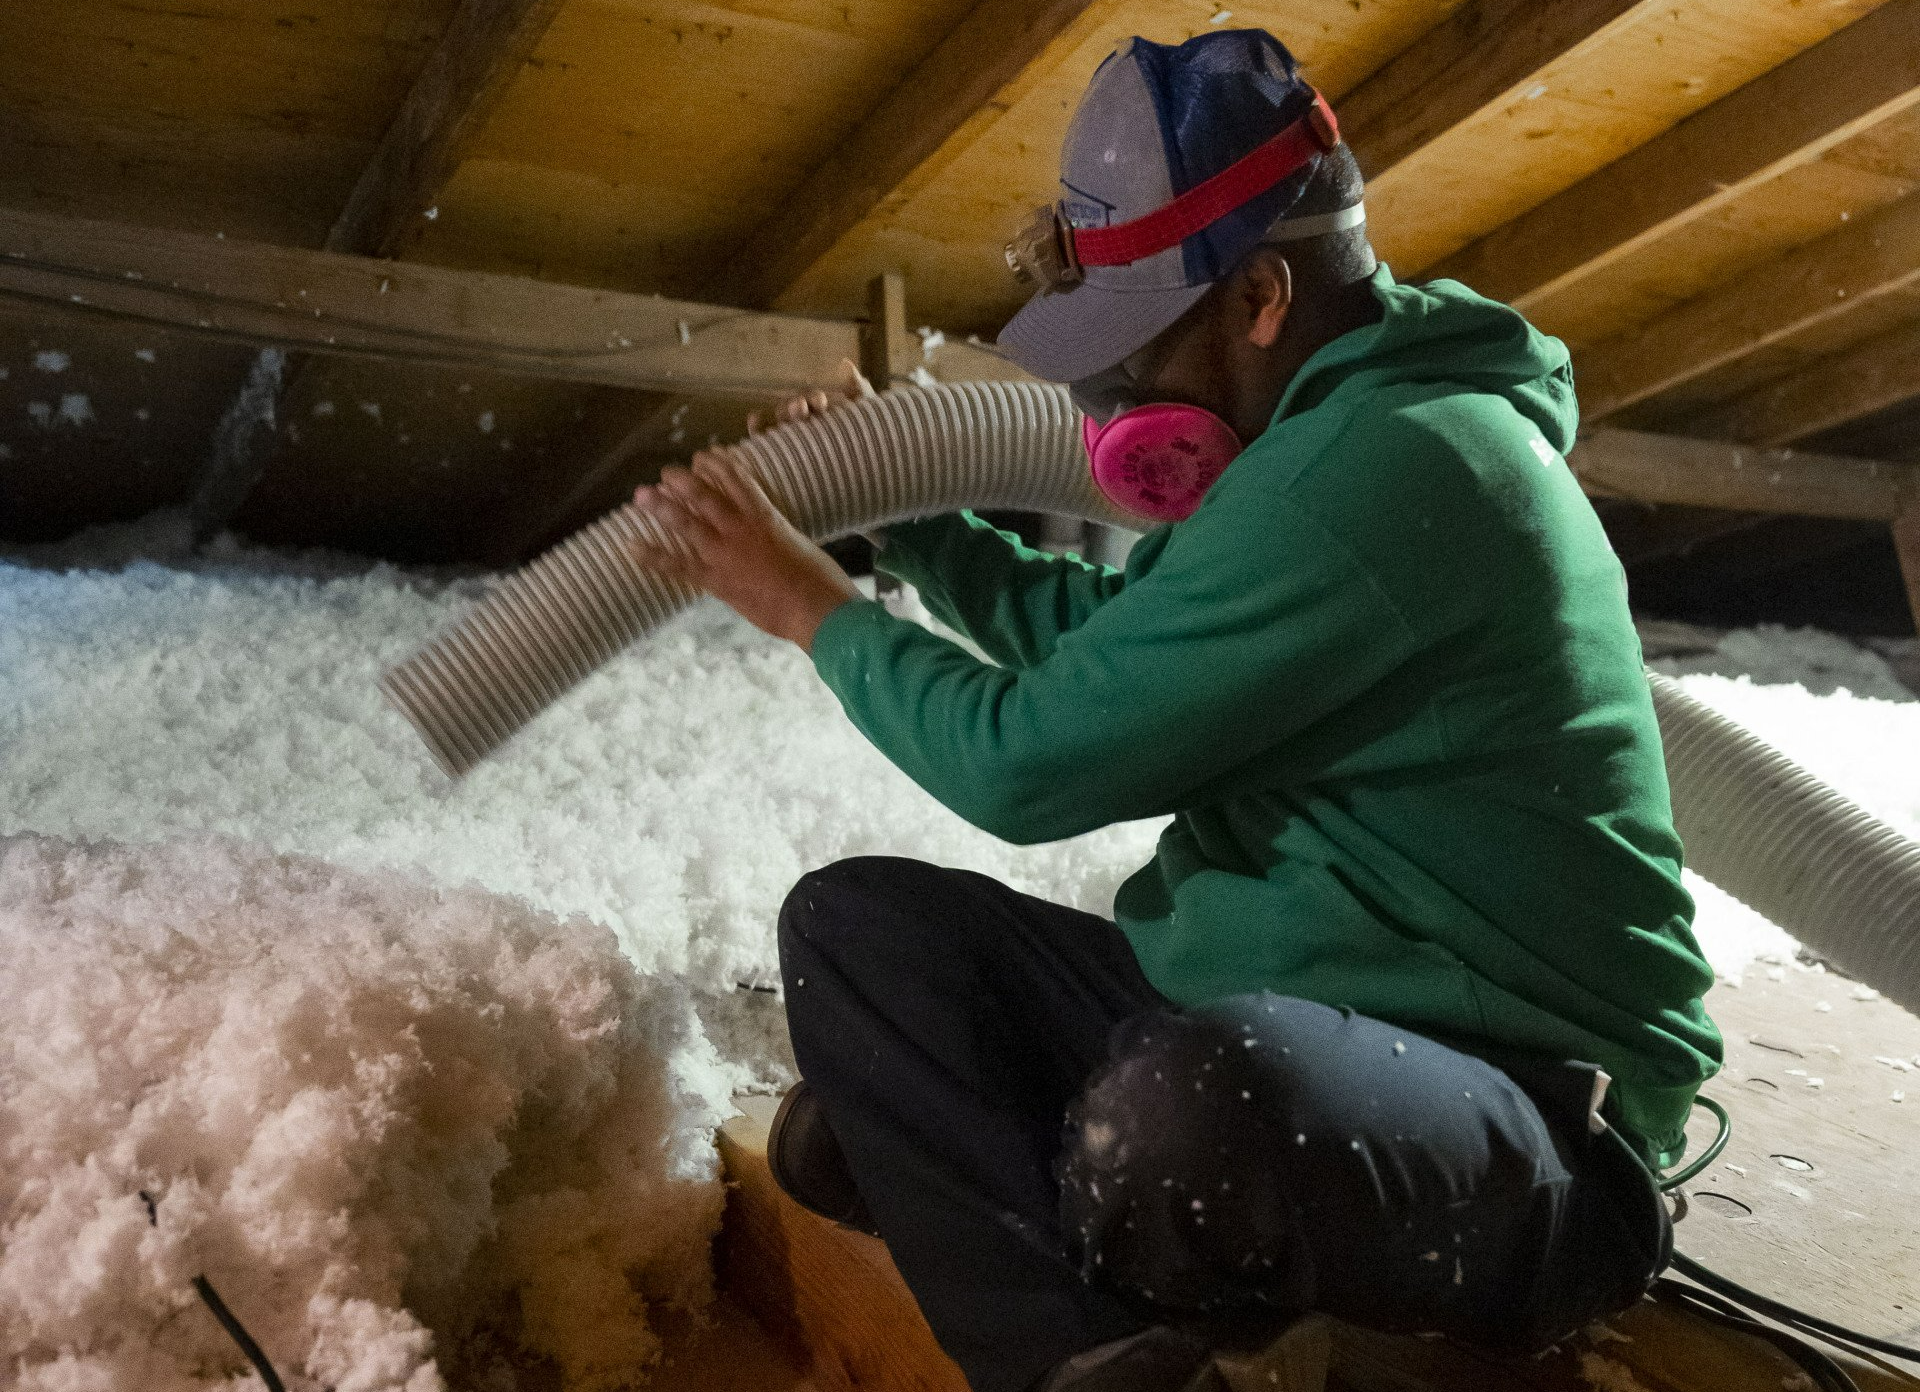 A man wearing a mask is blowing insulation into an attic.